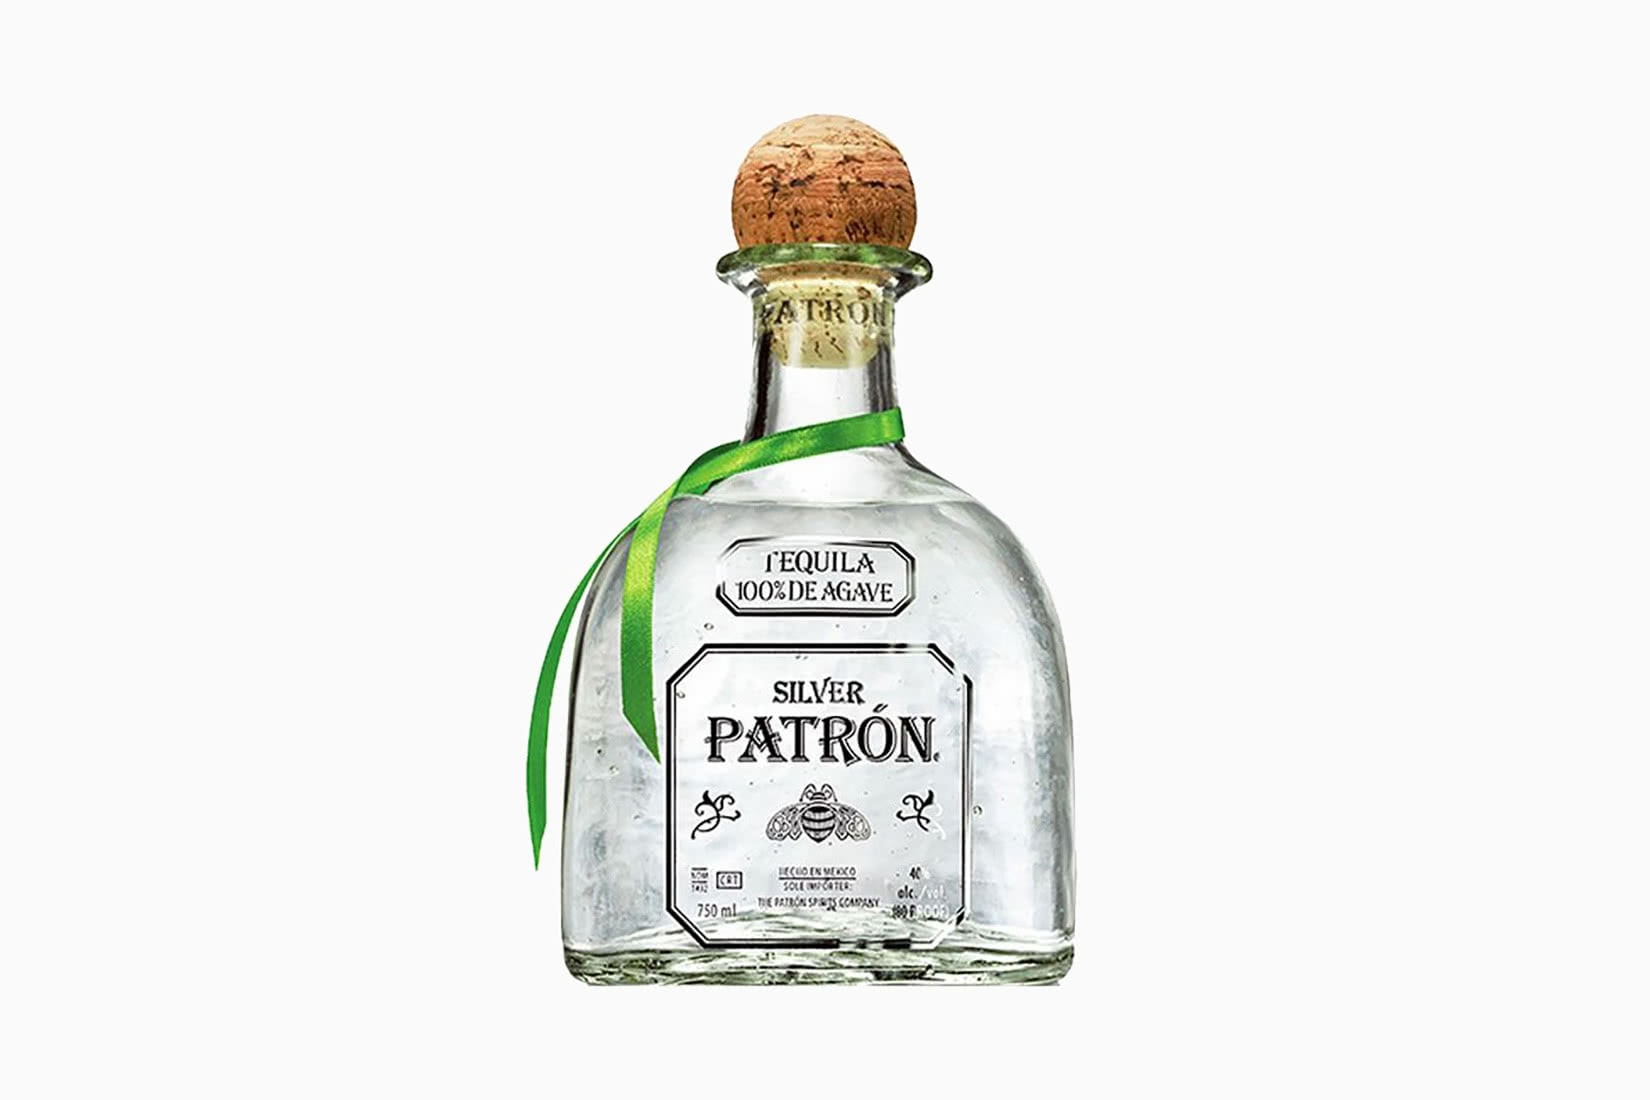 patron Tequila Silver bottle price size - Luxe Digital